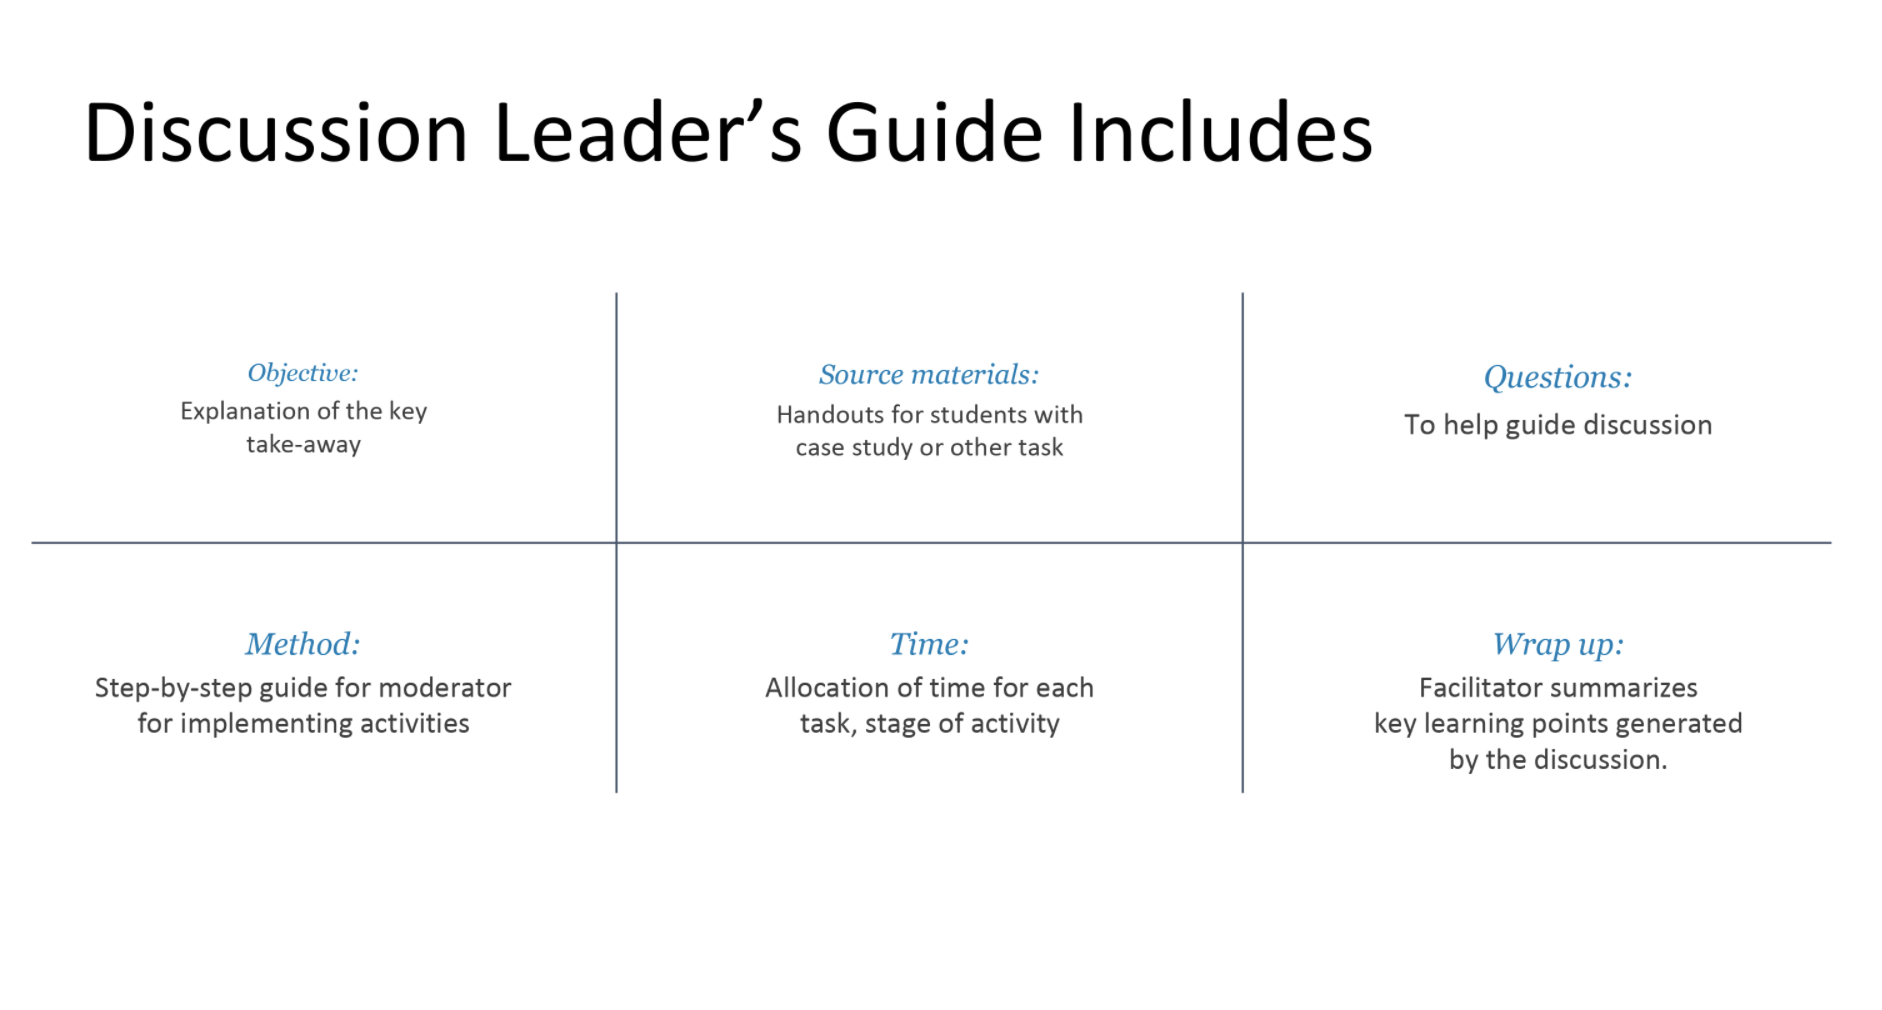 Discussion Leader's Guide